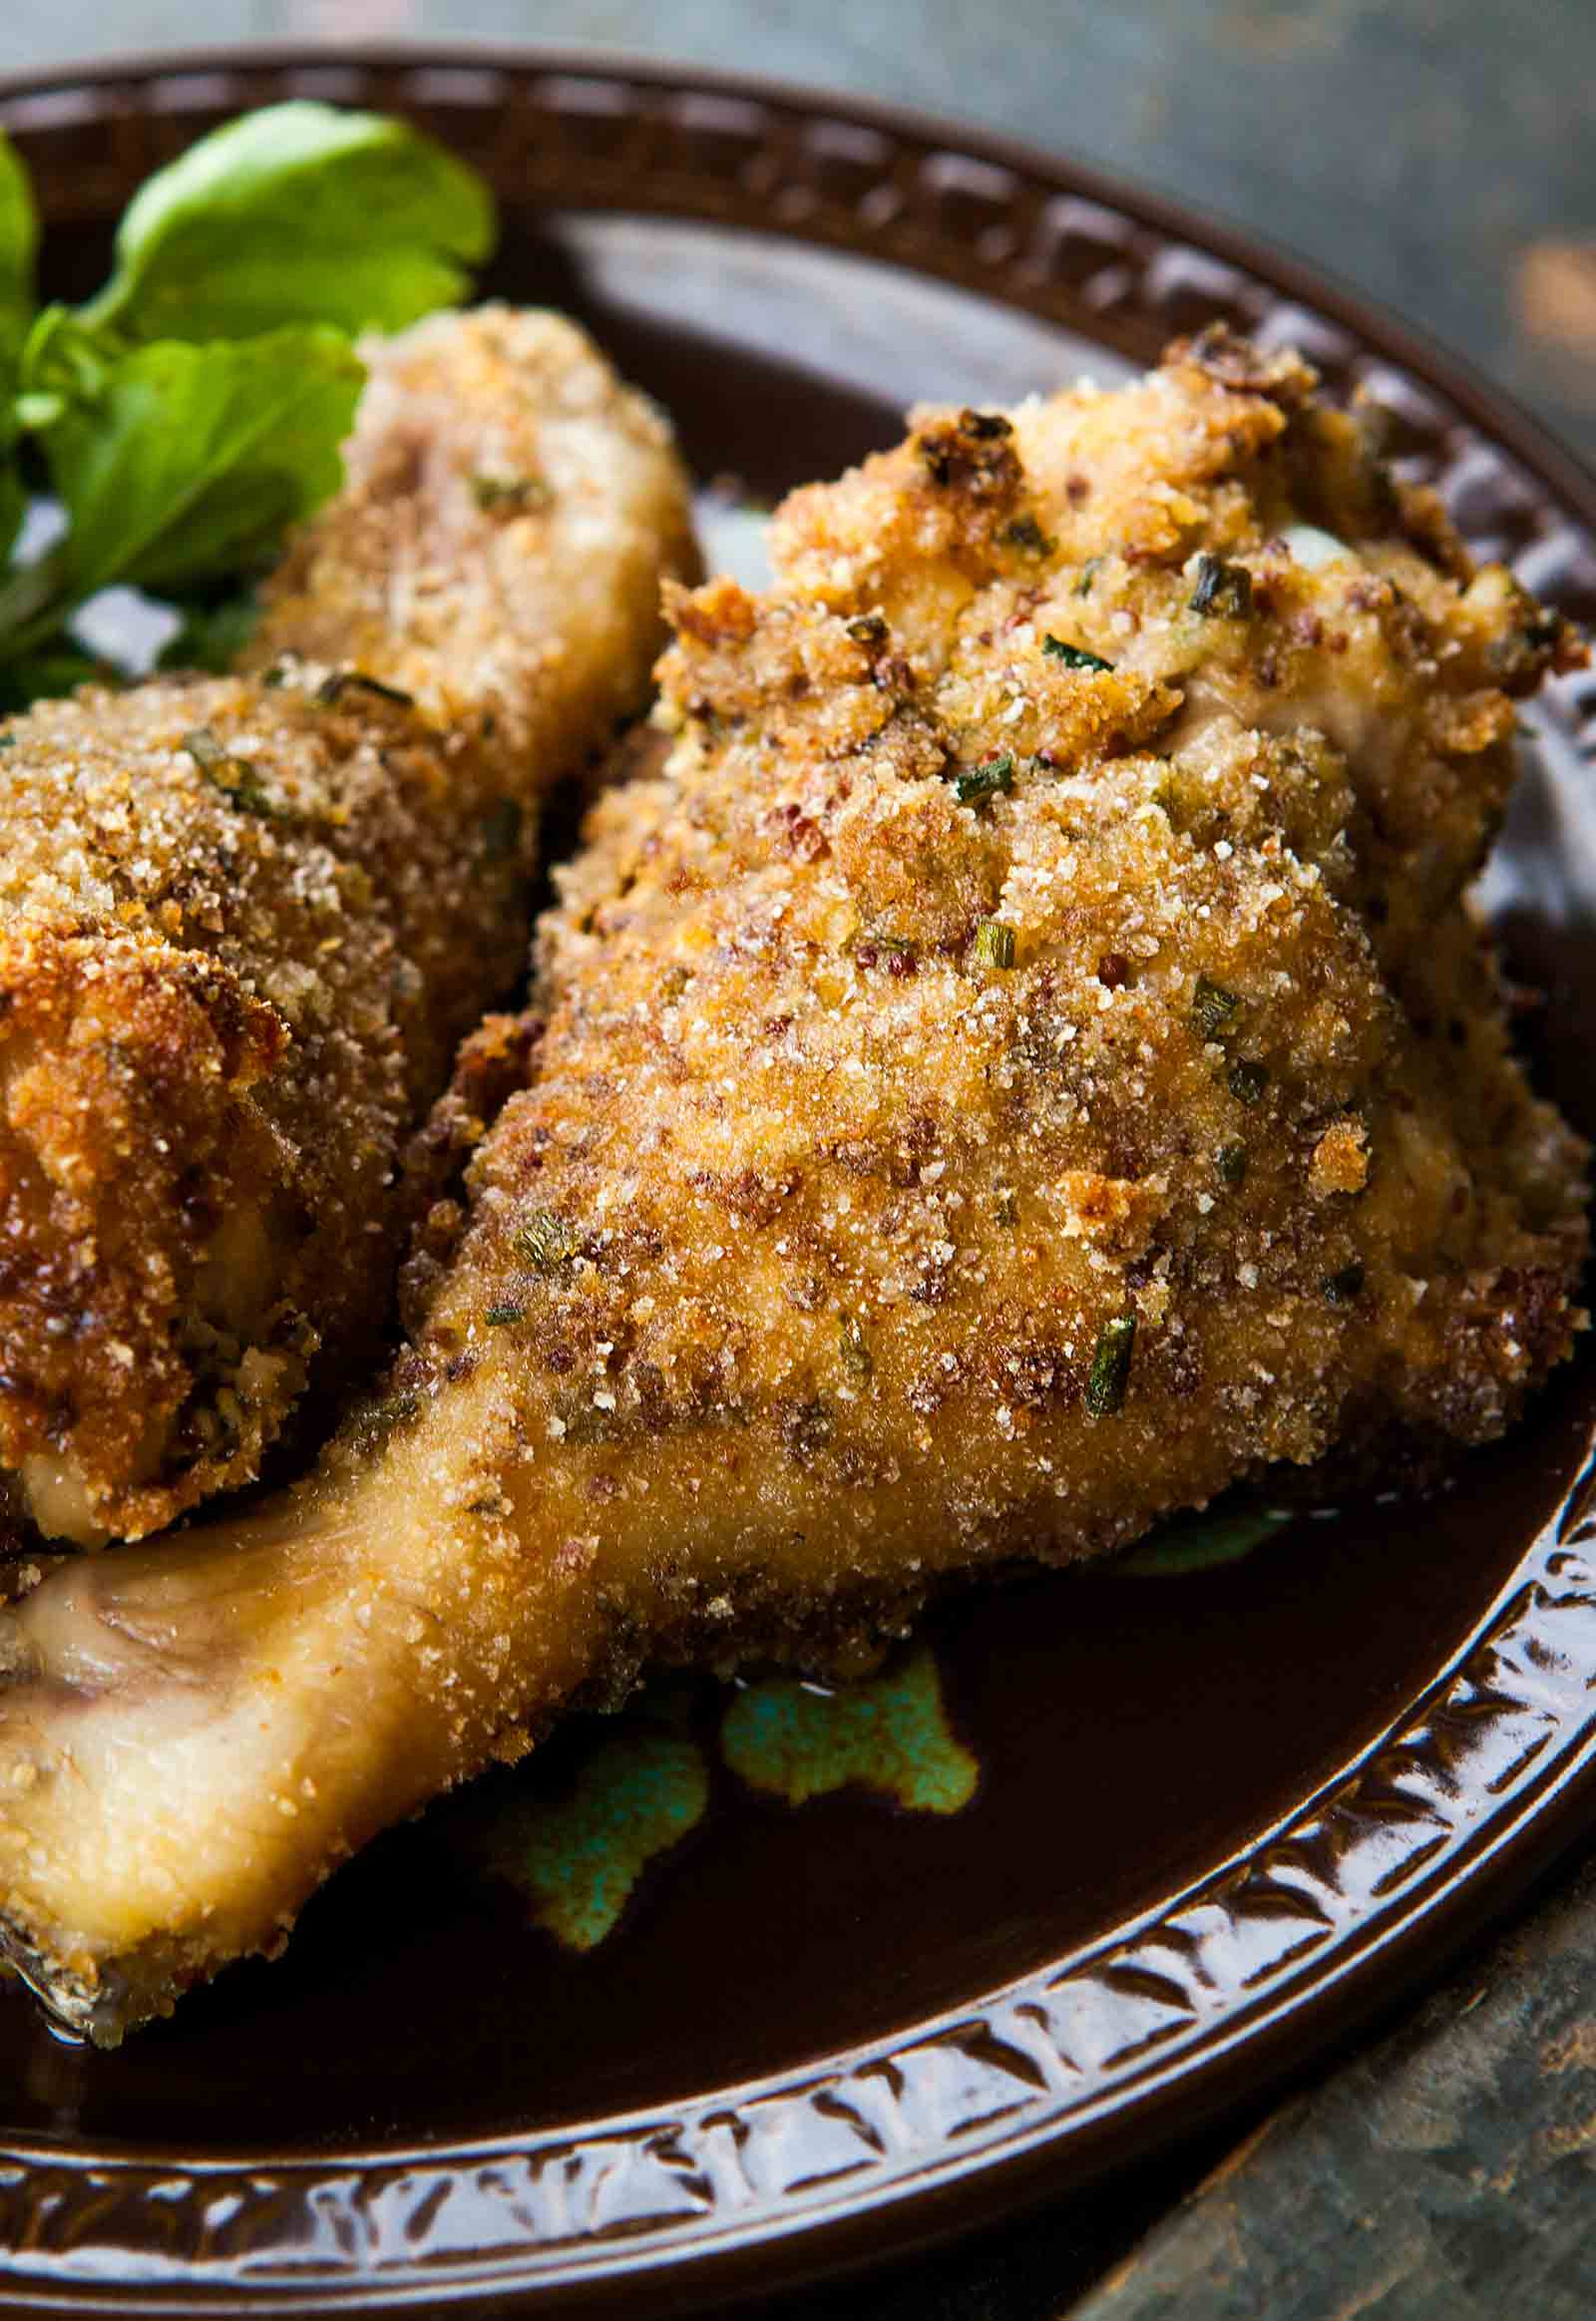 Recipe For Baked Chicken
 Breaded and Baked Chicken Drumsticks Recipe